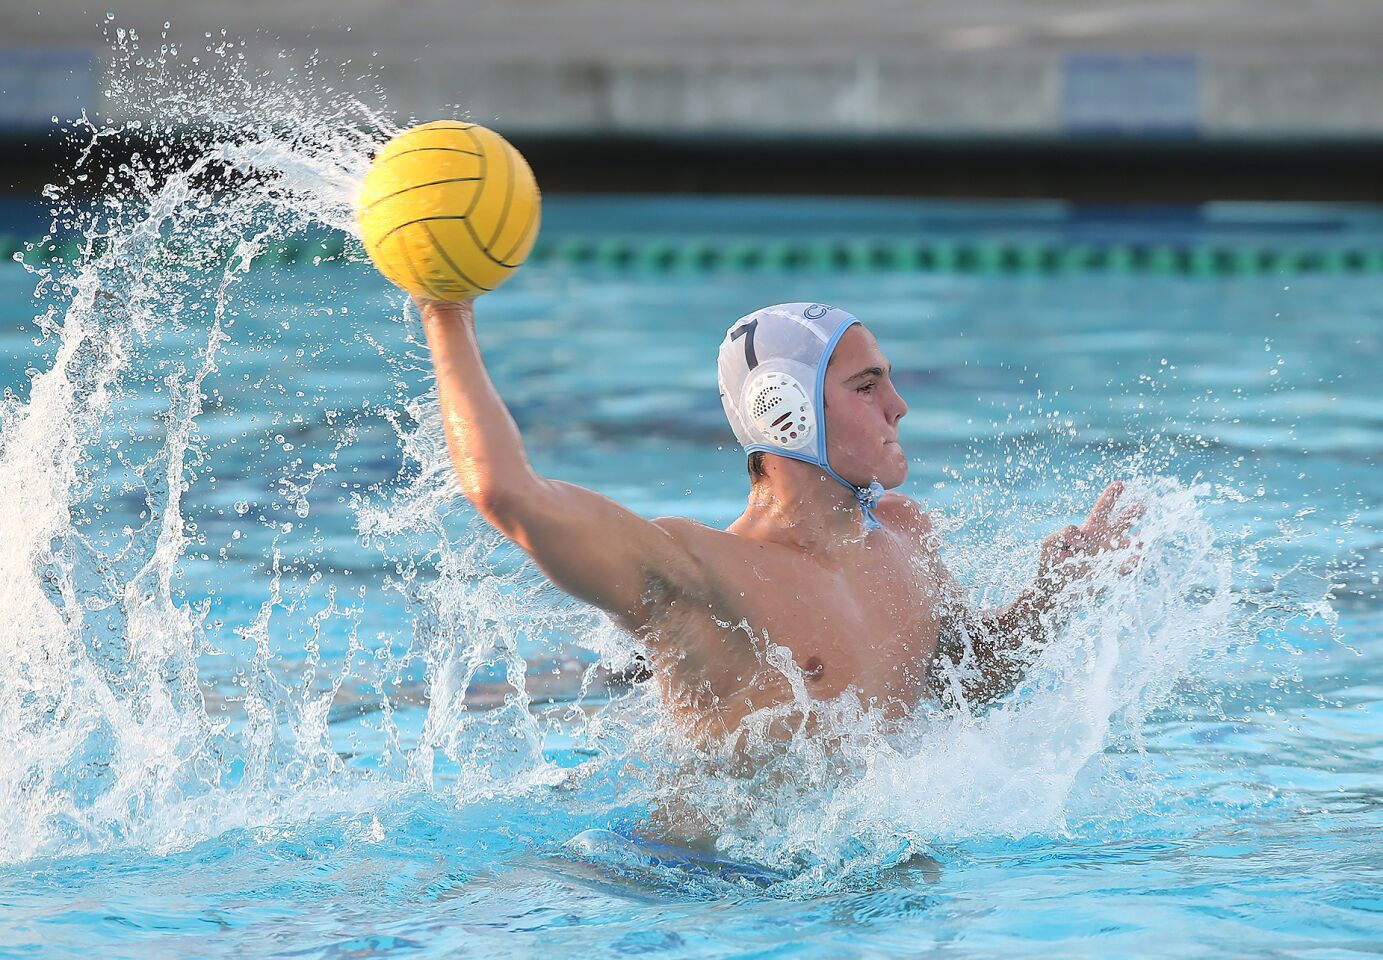 Corona Del Mar's Tanner Pulice shoots and scores a penalty shot during wild-card round of the CIF Southern Section Division 2 playoffs at Beckman on Tuesday.